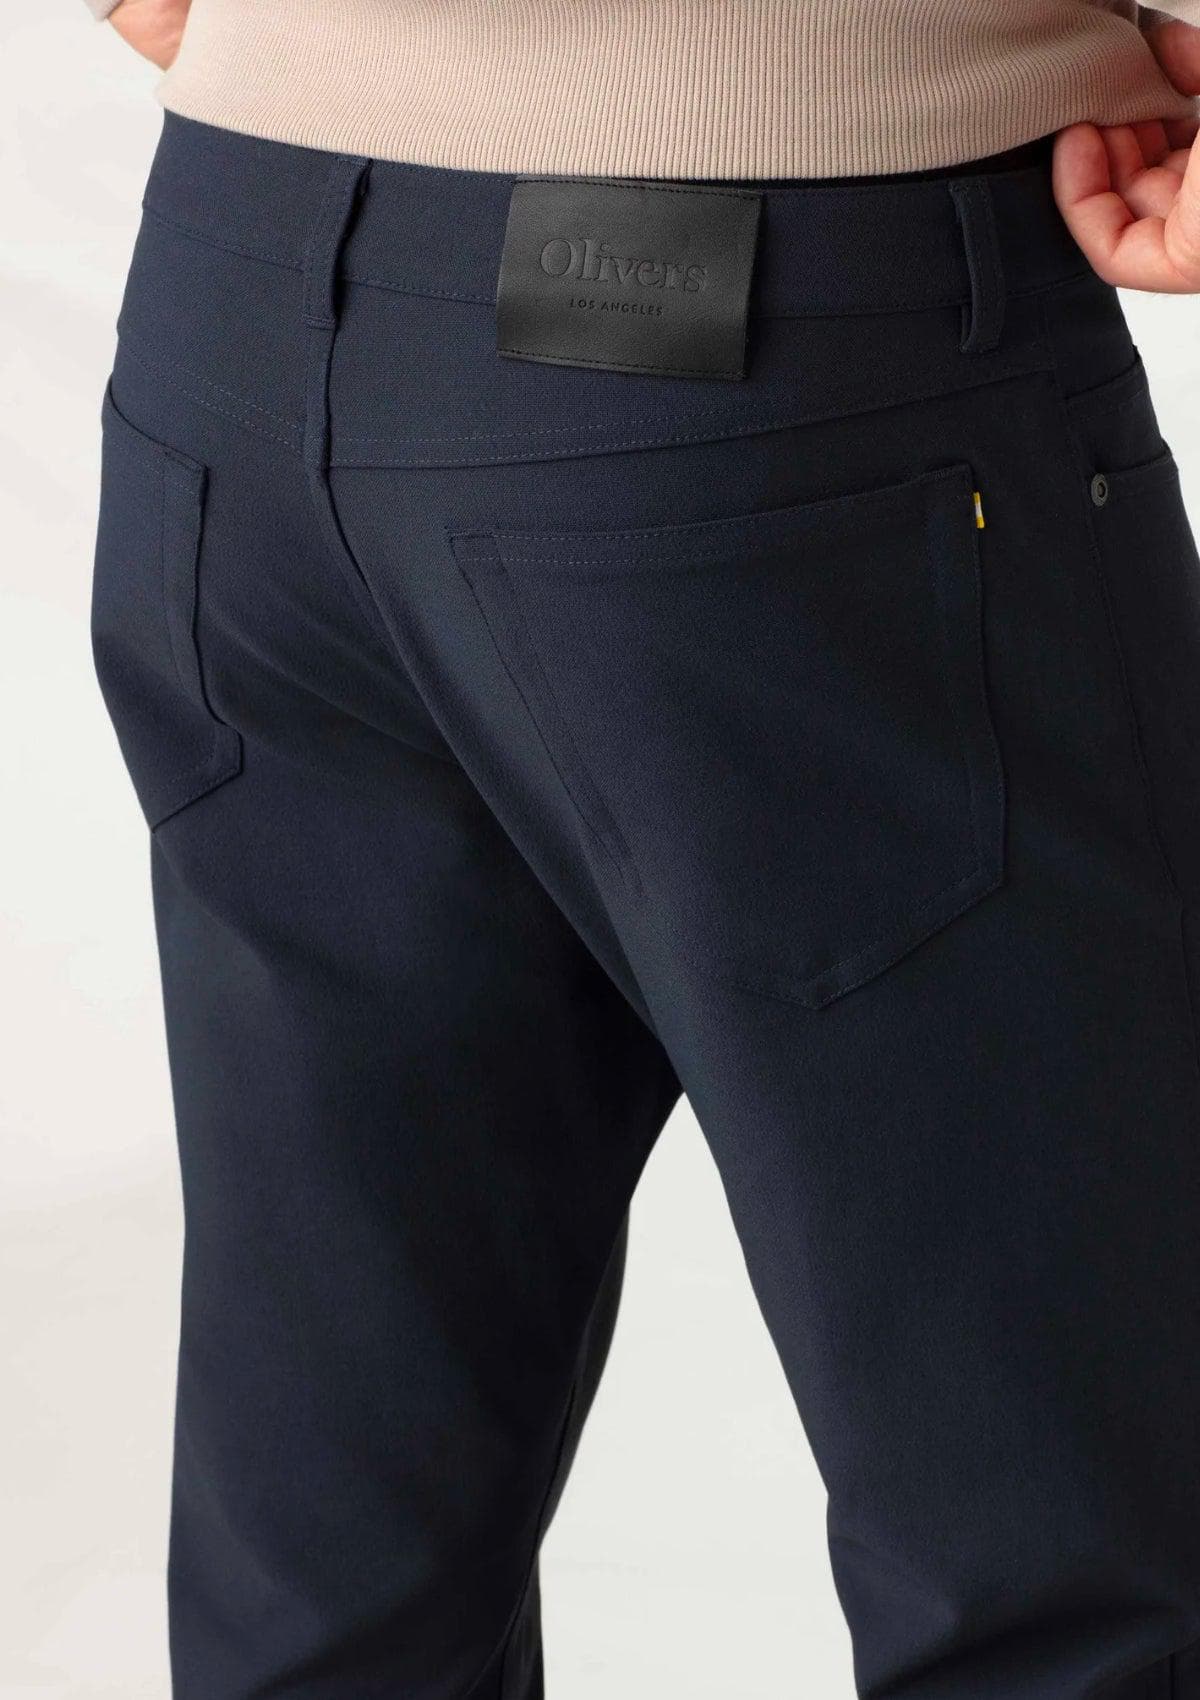 Olivers Downtown Pant - Dark Navy